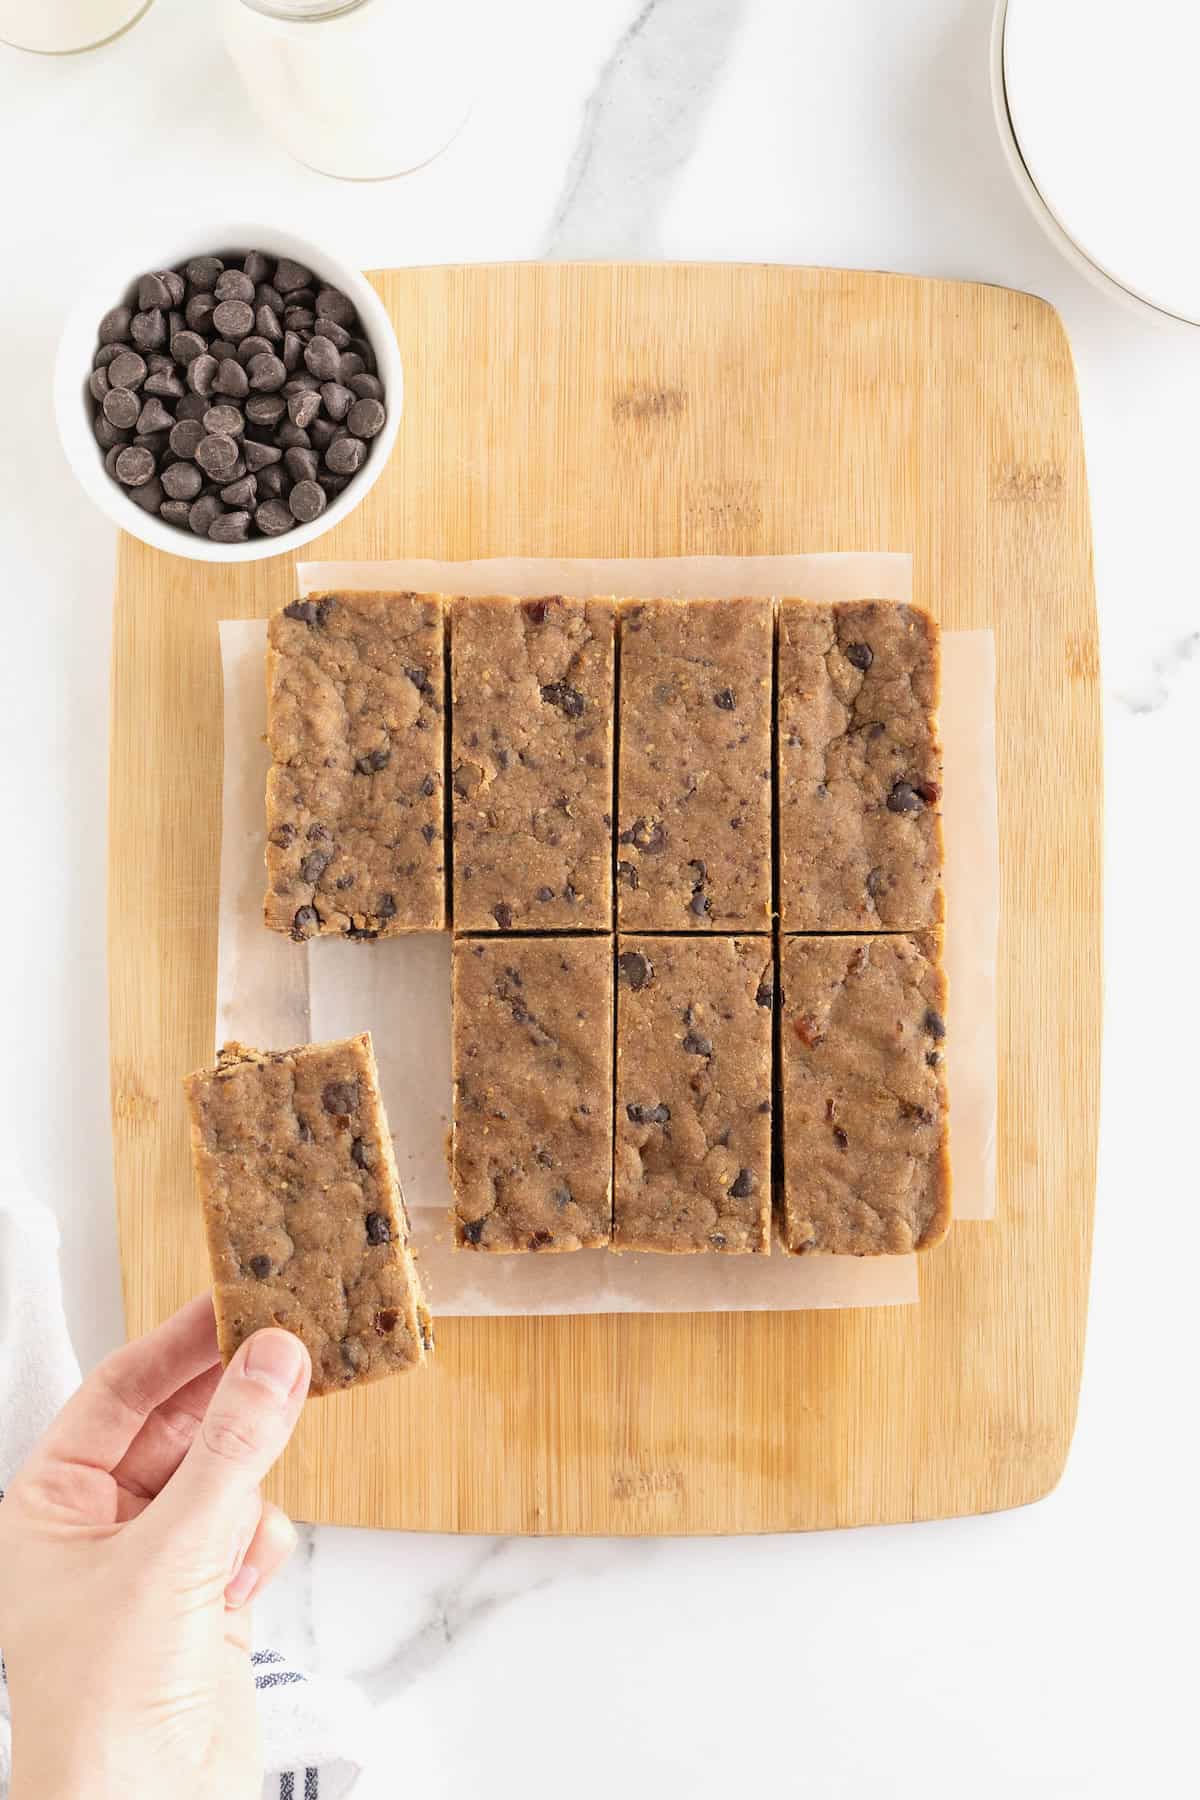 10 peanut butter chocolate chip breakfast bars on a parchment lined light wood cutting board.